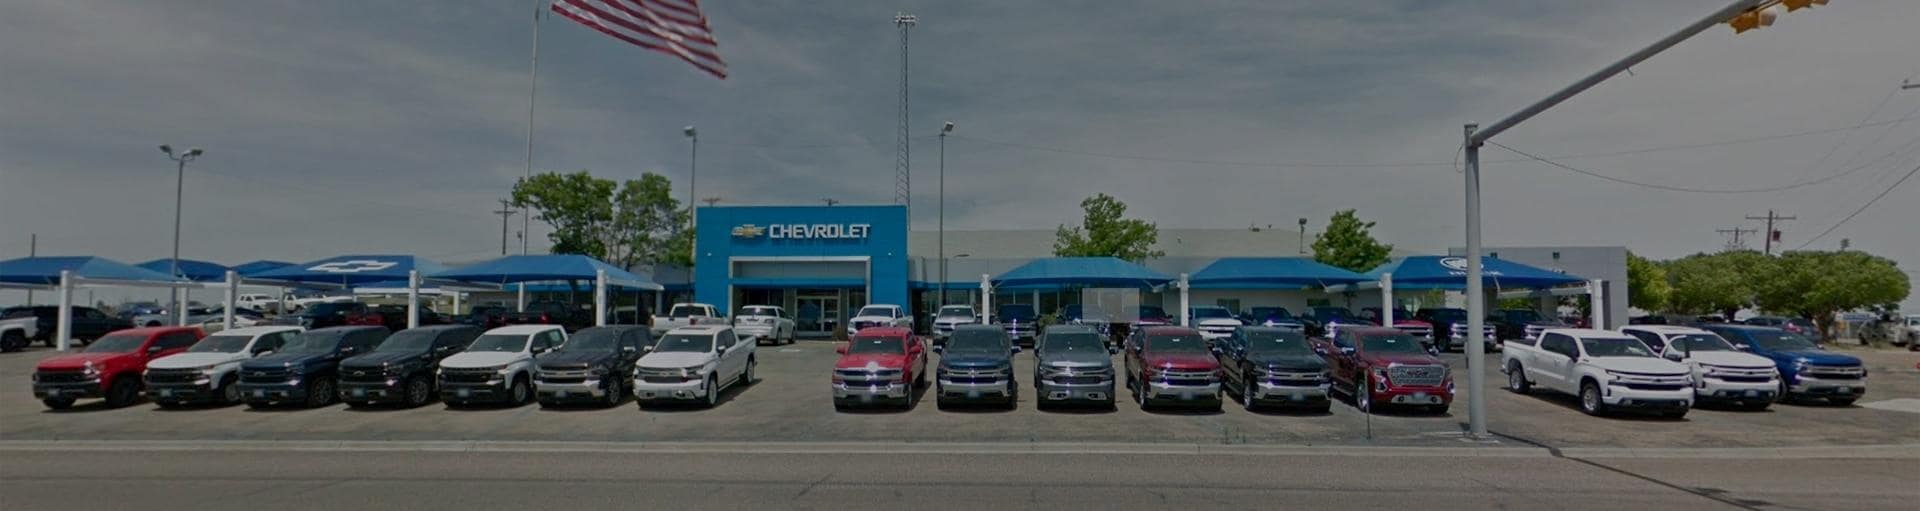 Country Chevrolet Borger Service